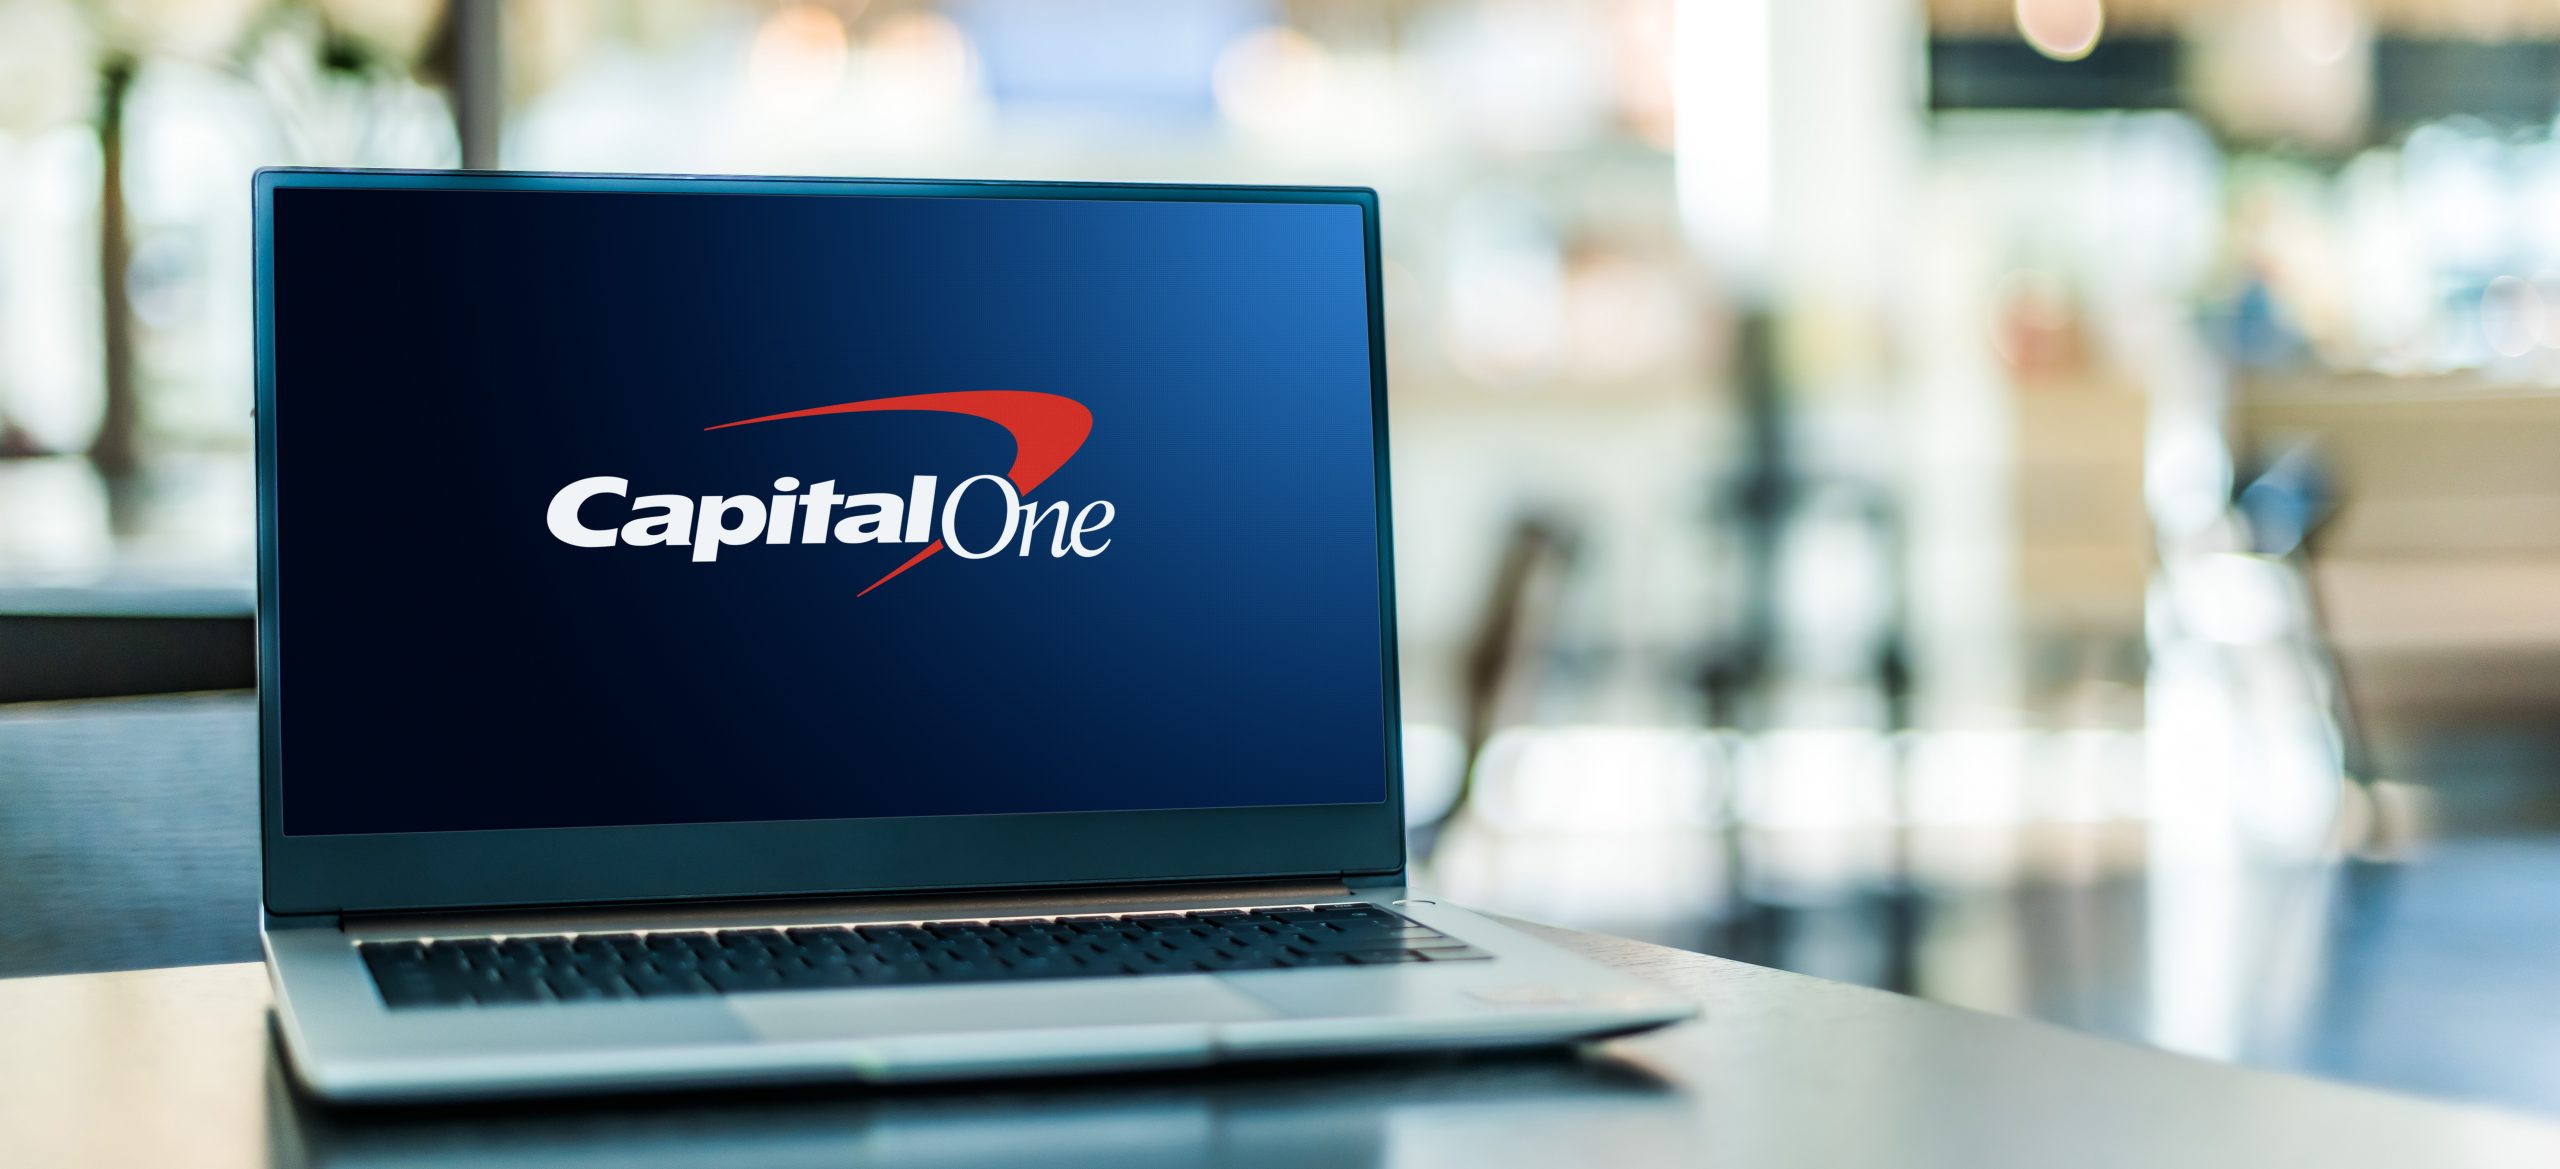 Laptop displaying logo of Capital One Financial Corporation